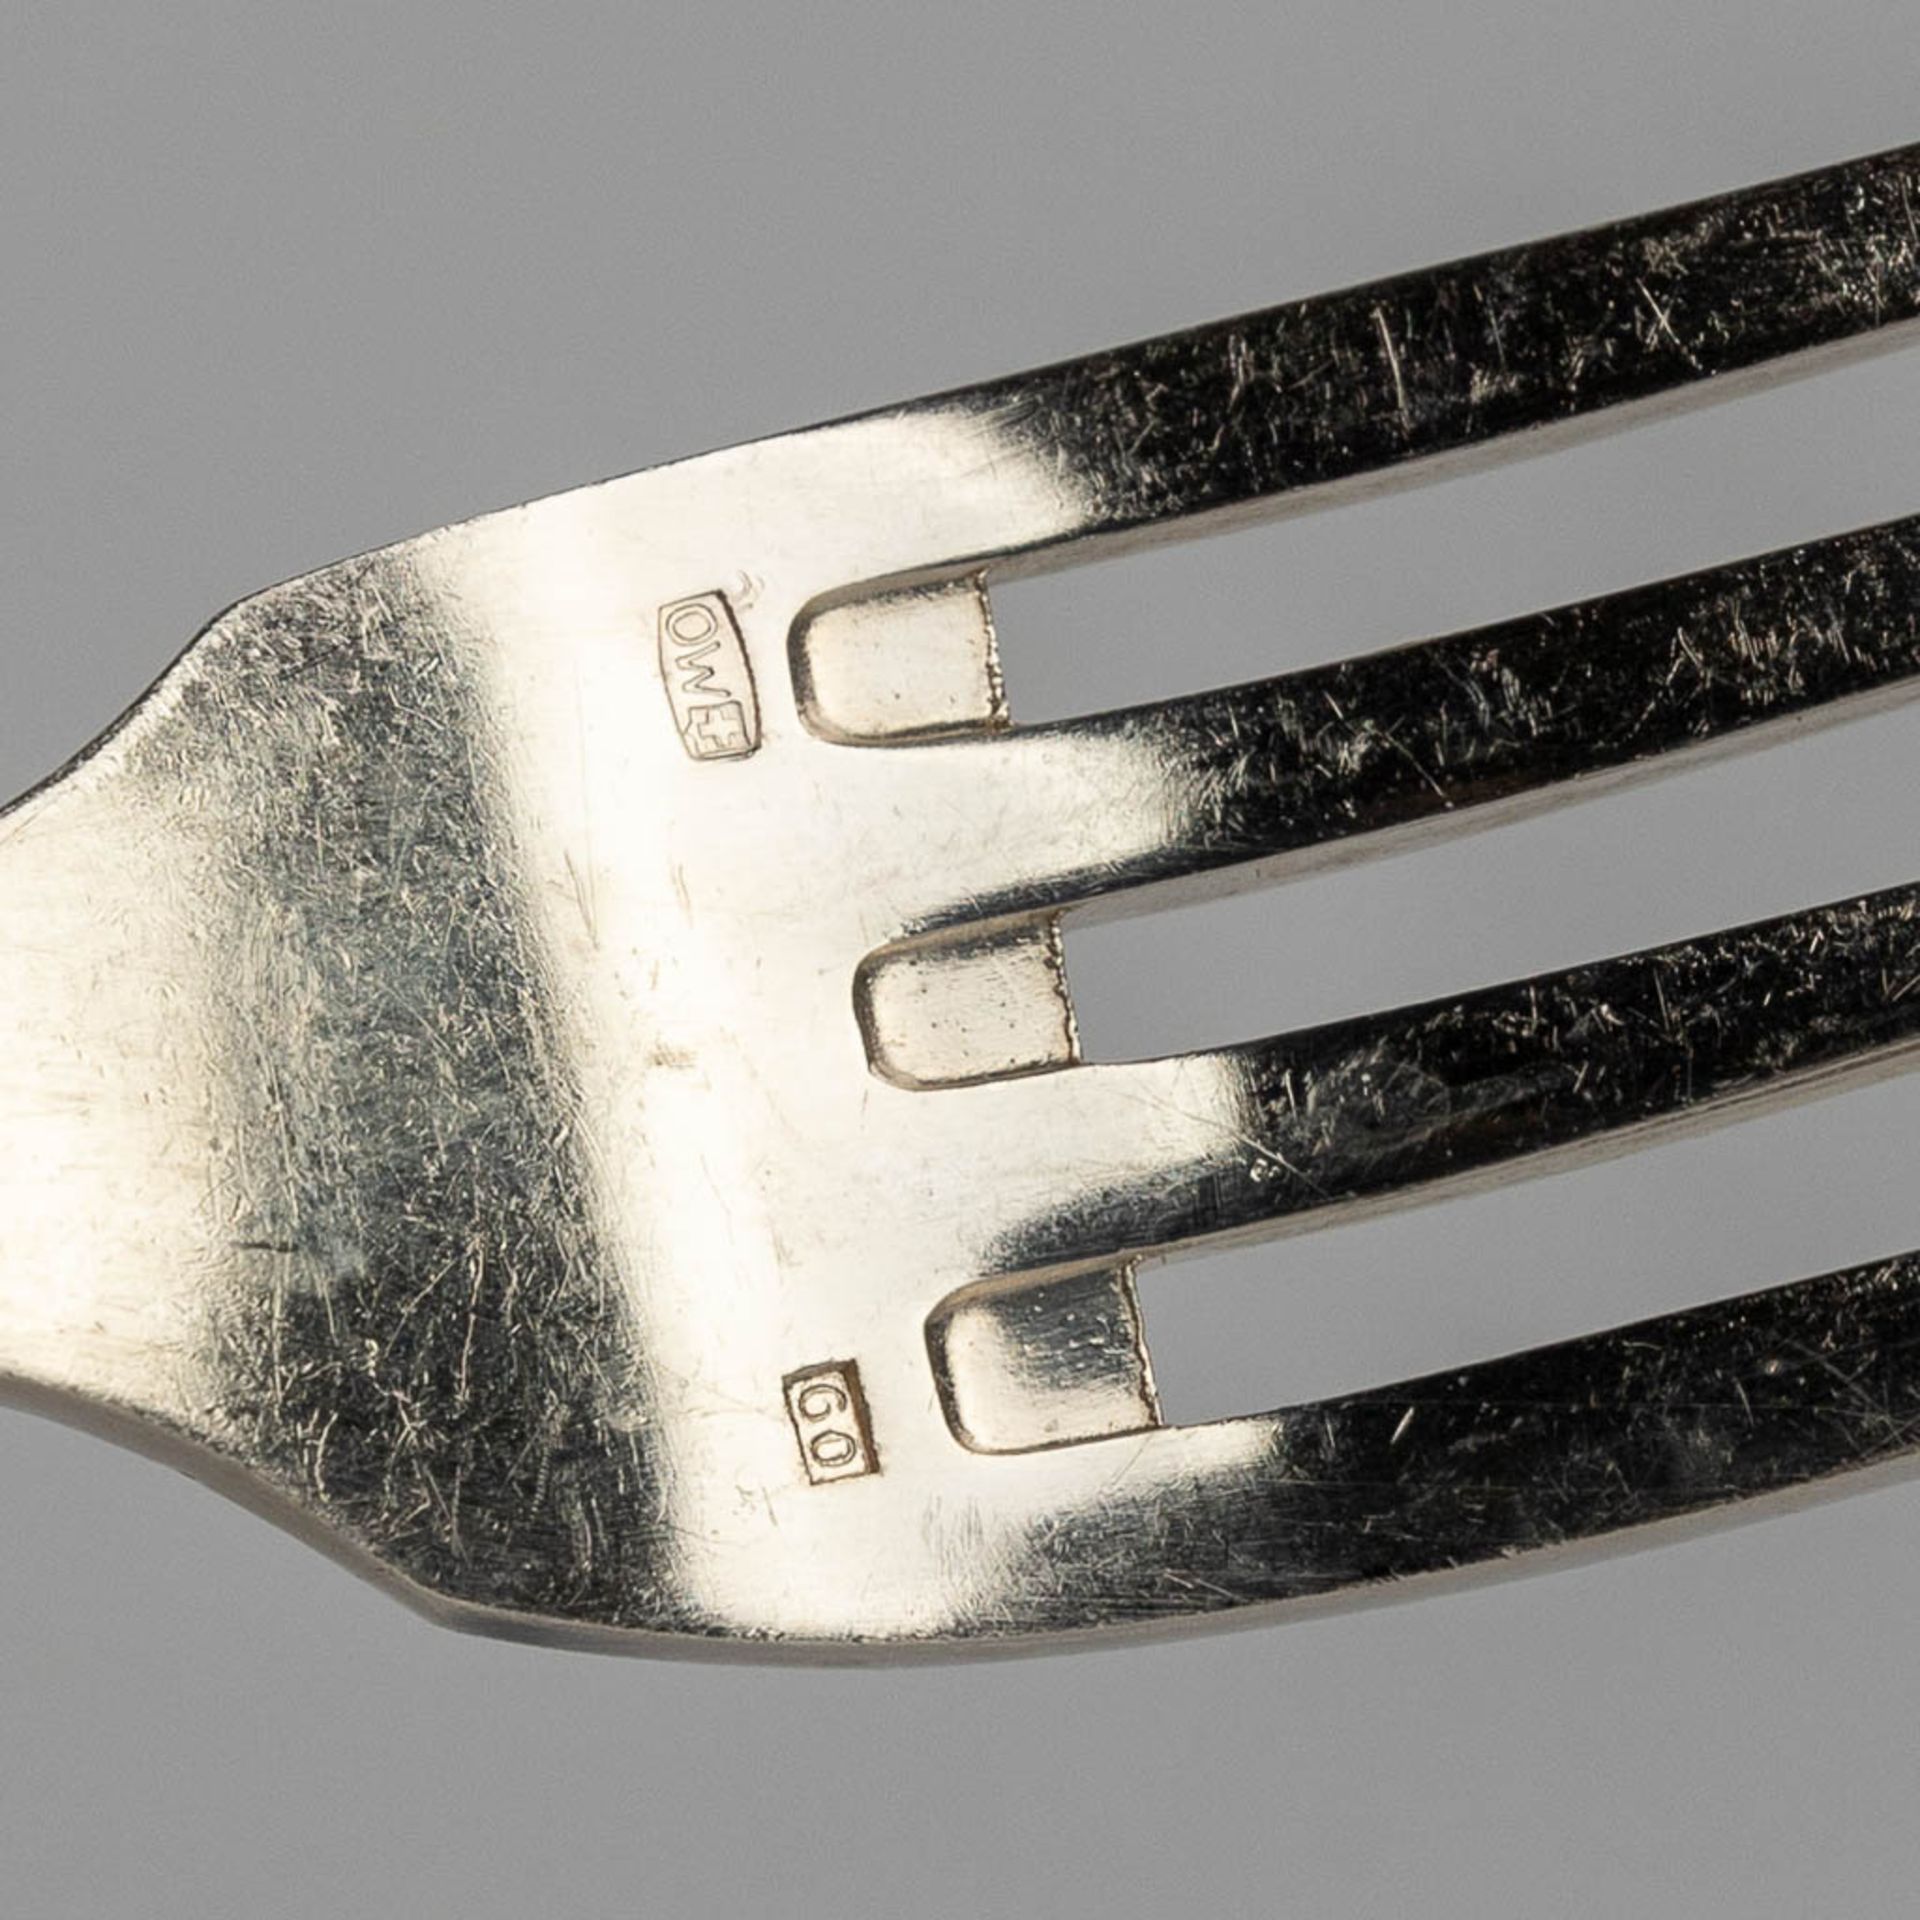 B. Wiskemann, Bruxelles, a silver-plated cutlery set, Louis XV style. (L: 30 x W: 39 x H: 22 cm) - Image 11 of 24